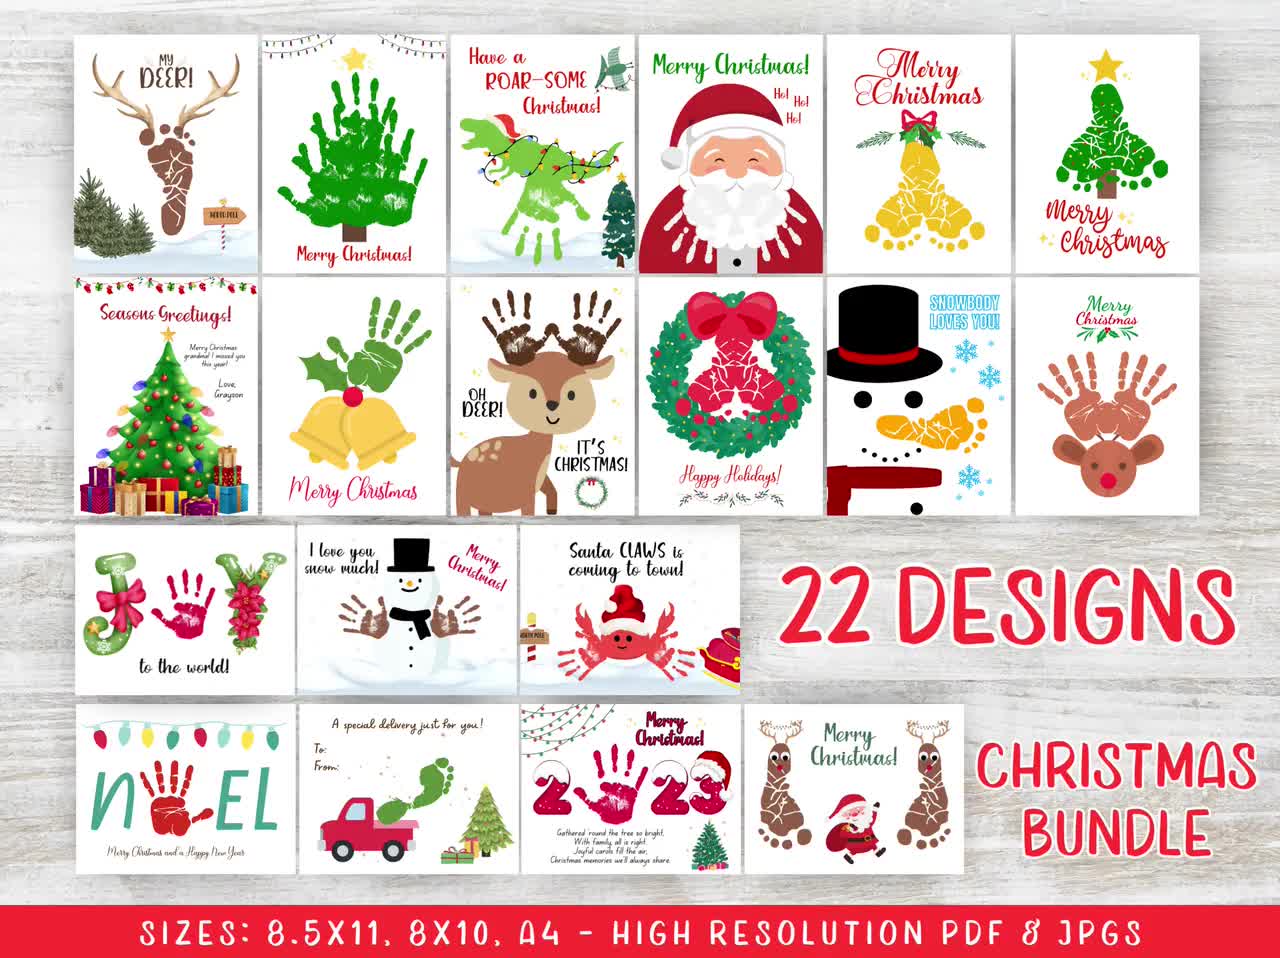 ALL WORKBOOKS BUNDLE - The Happy Ever Crafter